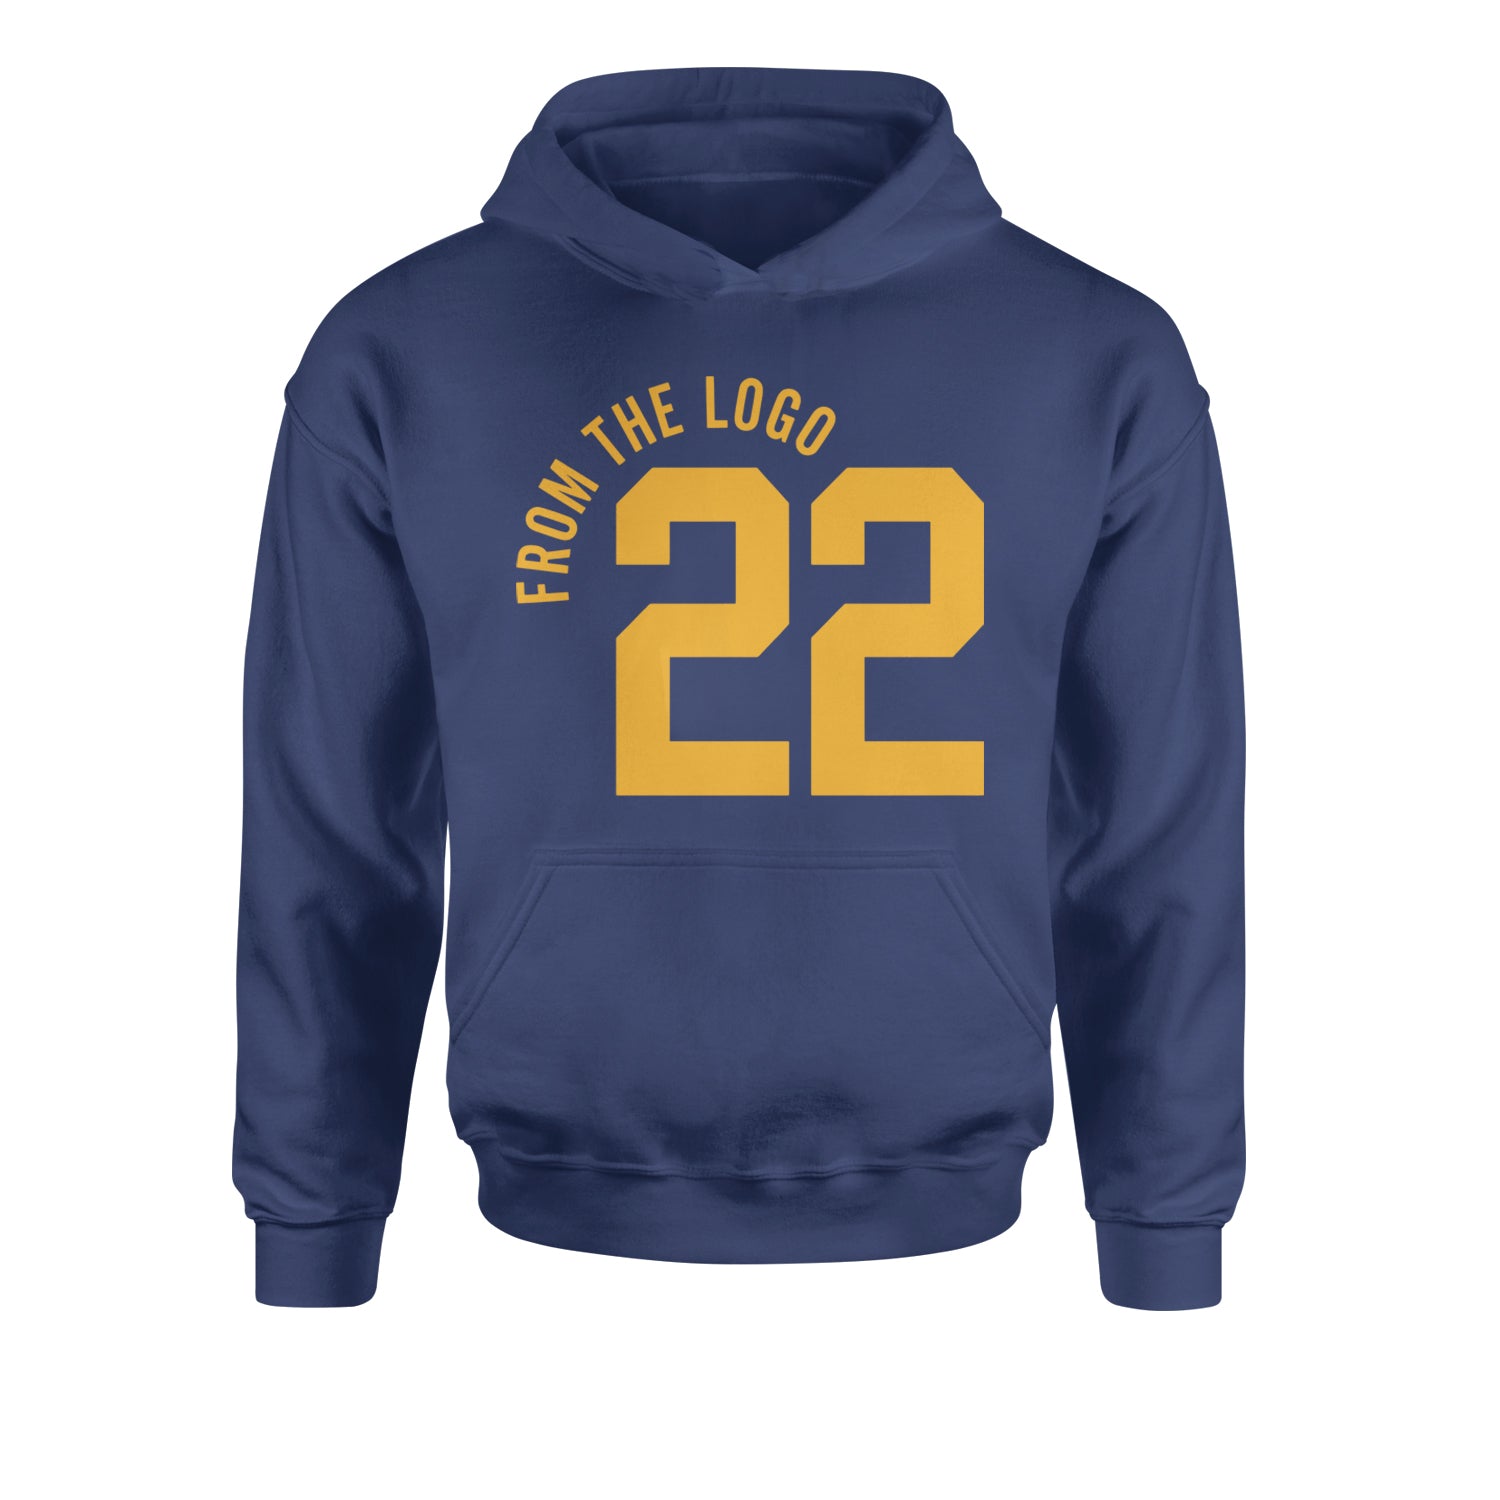 From The Logo #22 Basketball Youth-Sized Hoodie